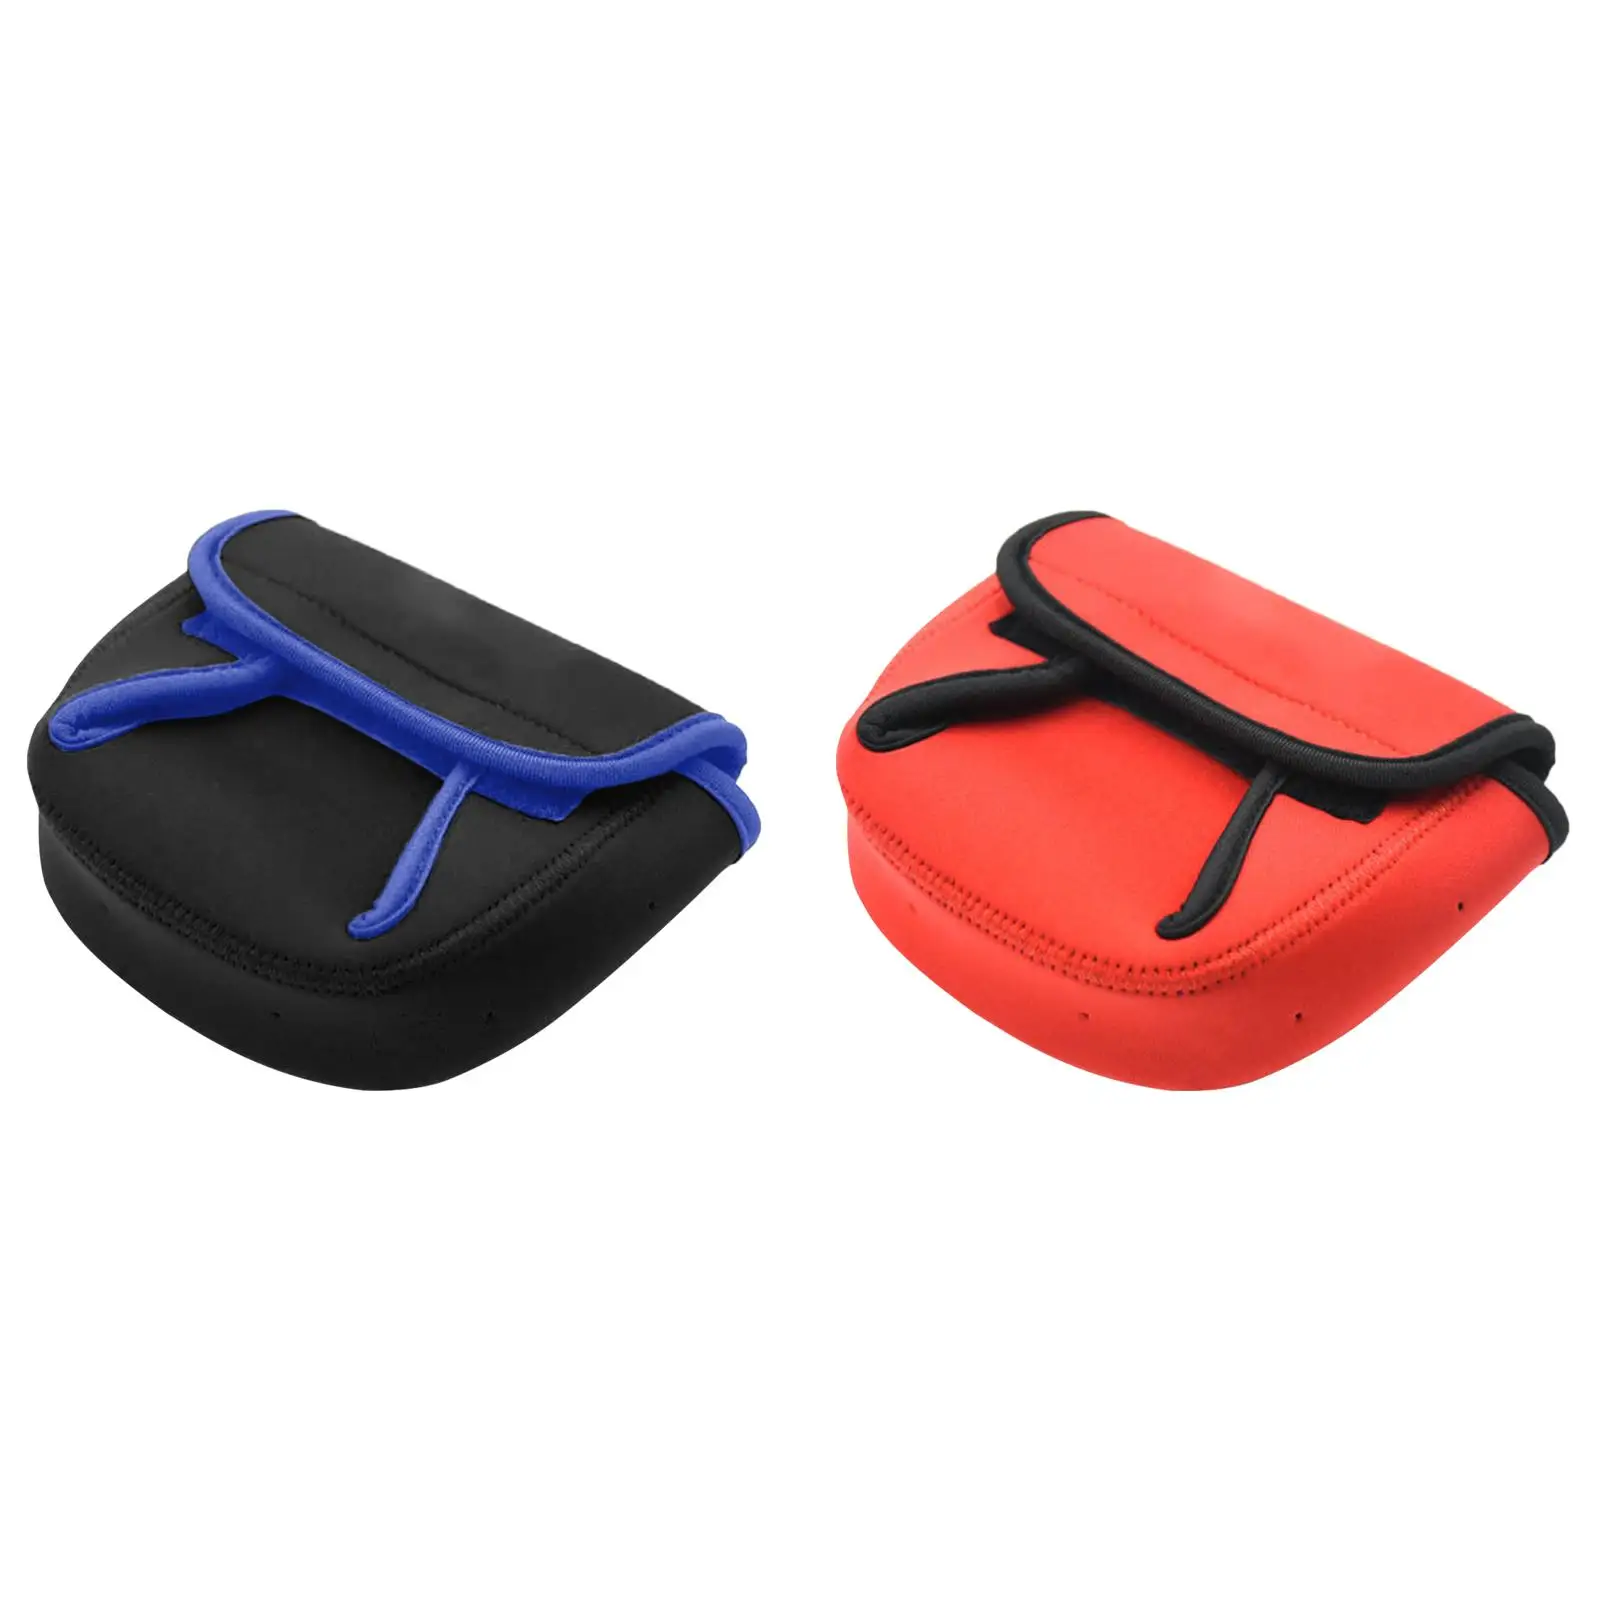 Lightweight Fishing Reel Bag Fishing Bags Fishing Reel Protective Case Neoprene Fishing Reel Protective Case Cover Pouch Bag